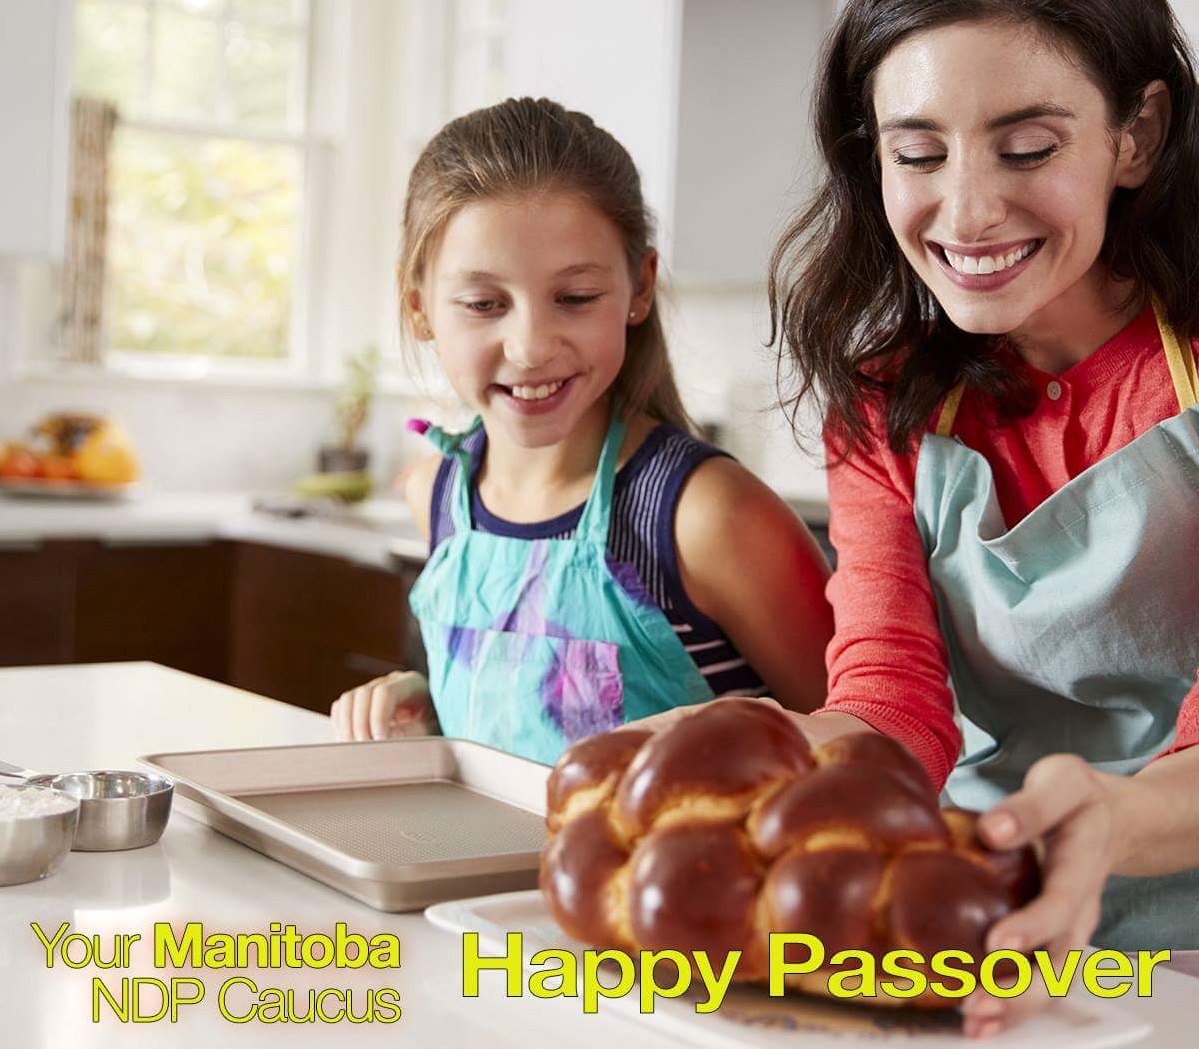 The 'Happy Passover' photo tweeted by a member of the Manitoba NDP caucus has since been deleted. 